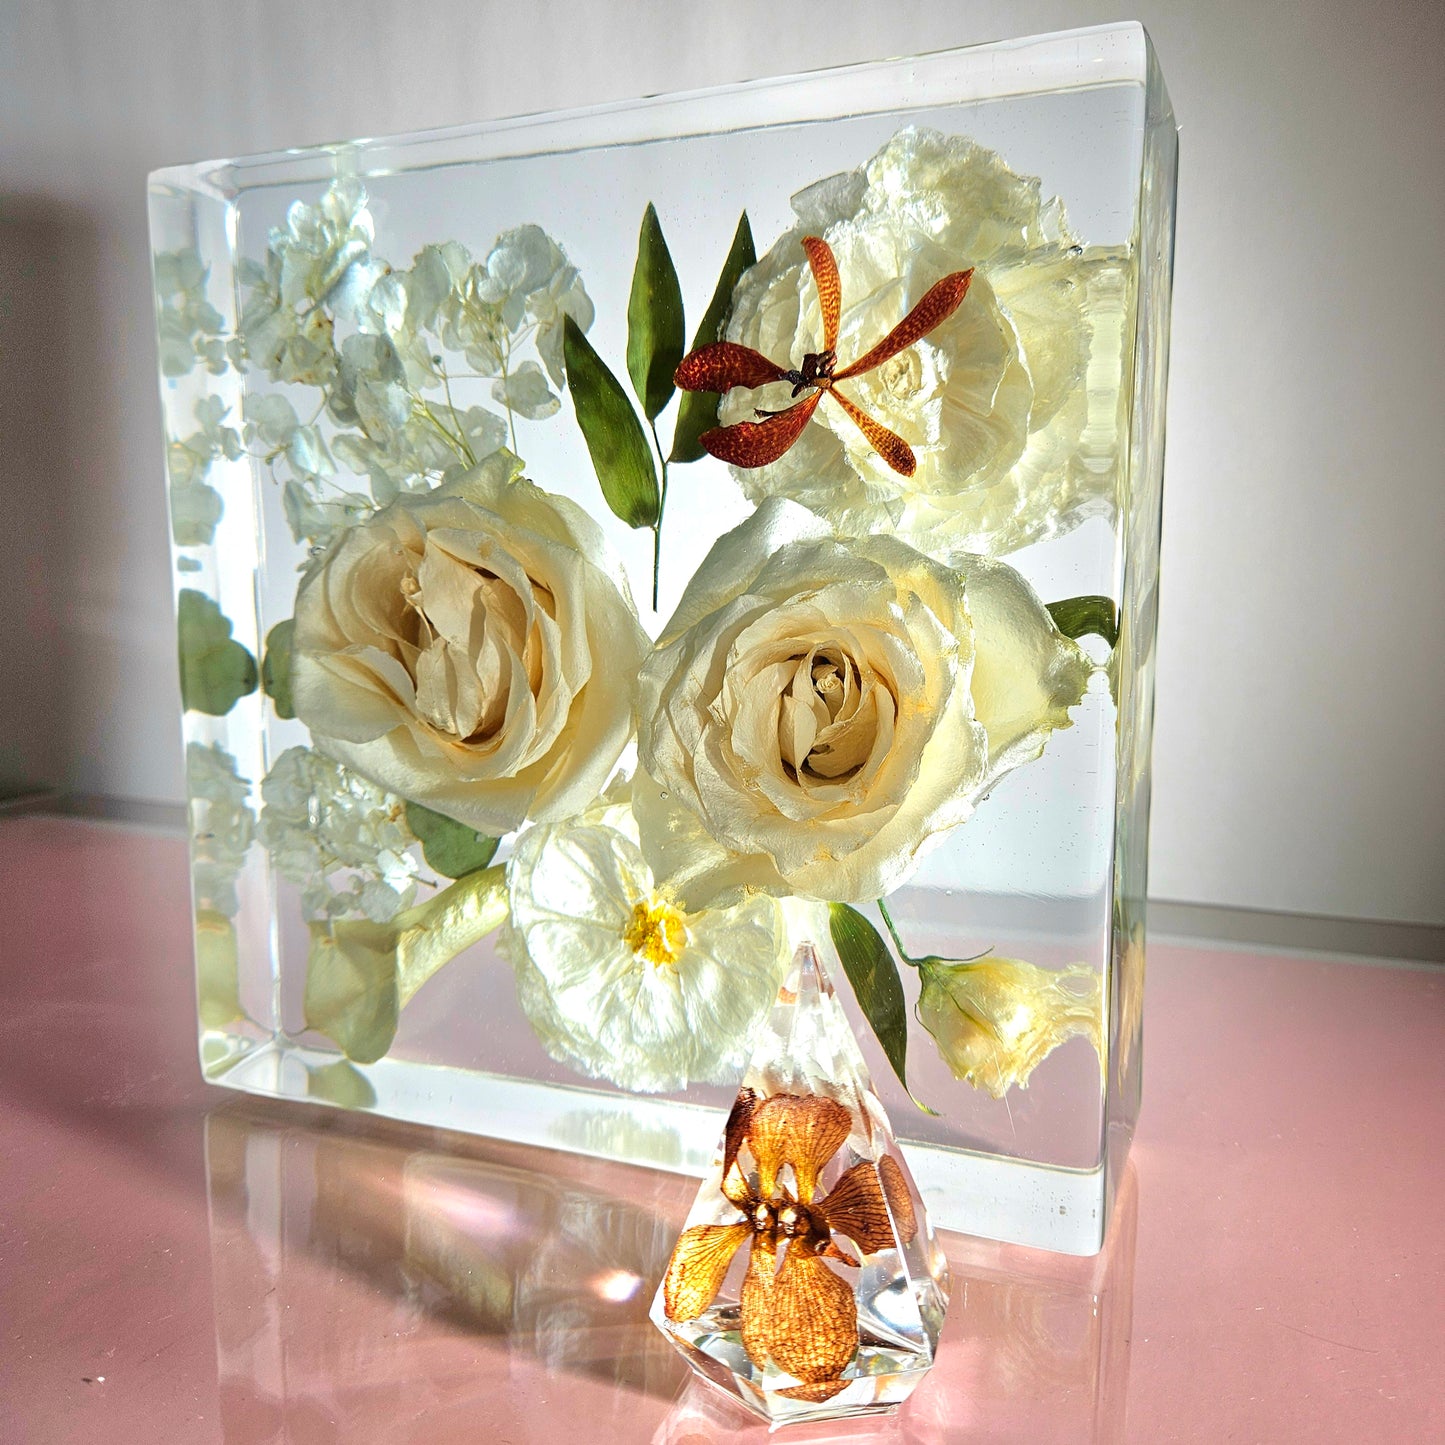 8"x 8" 3D Floral Resin Cube Wedding Bouquet Preservation Modern Fried Flowers Square Save Your Gift Keepsake